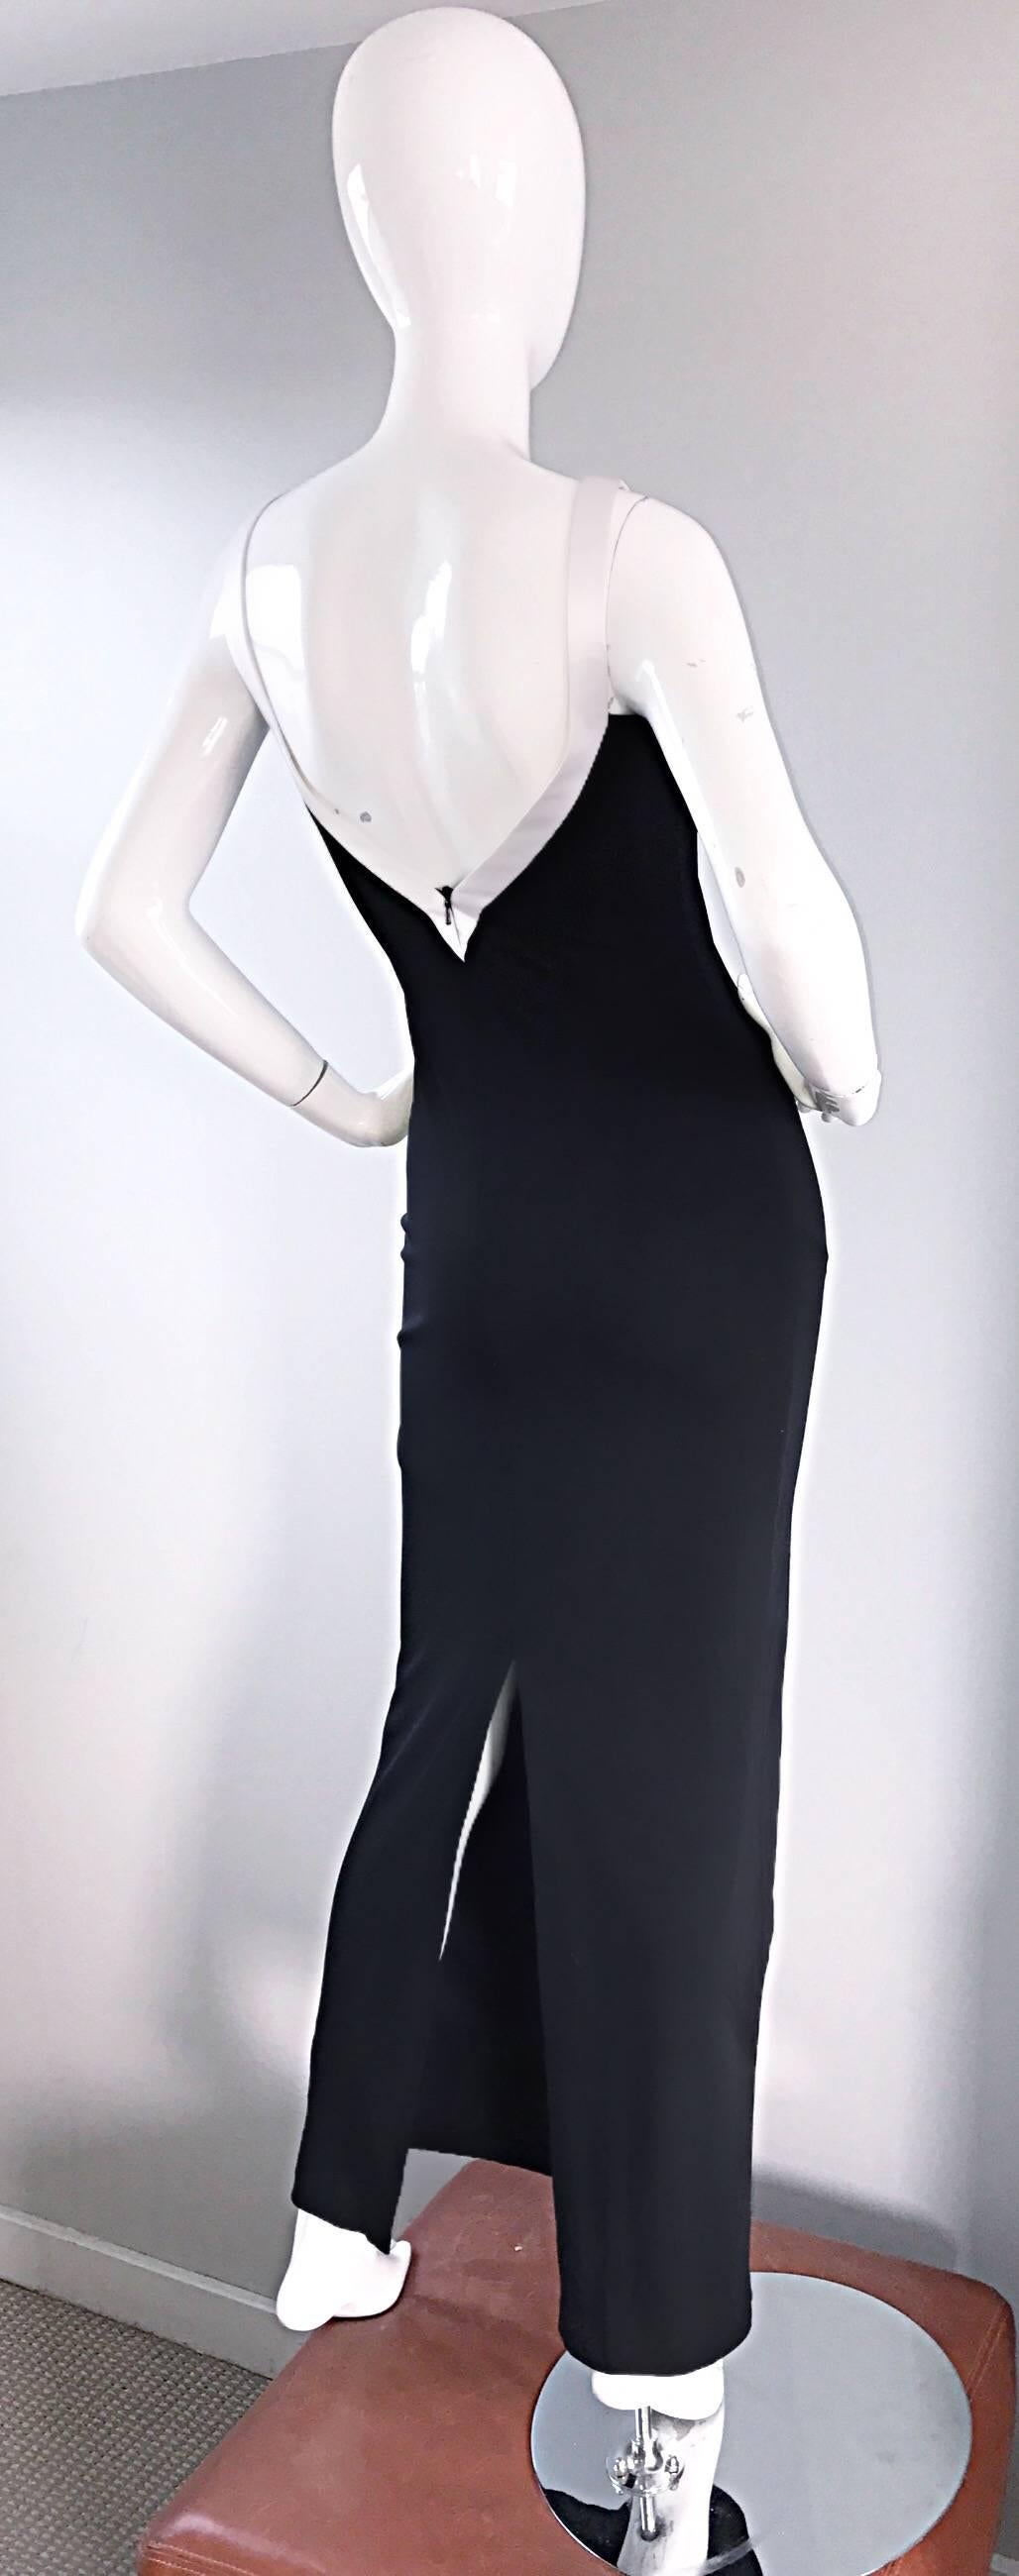 Dolce & Gabbana 1990s Vintage Black and White Iconic Jersey Dress Gown Dress For Sale 2